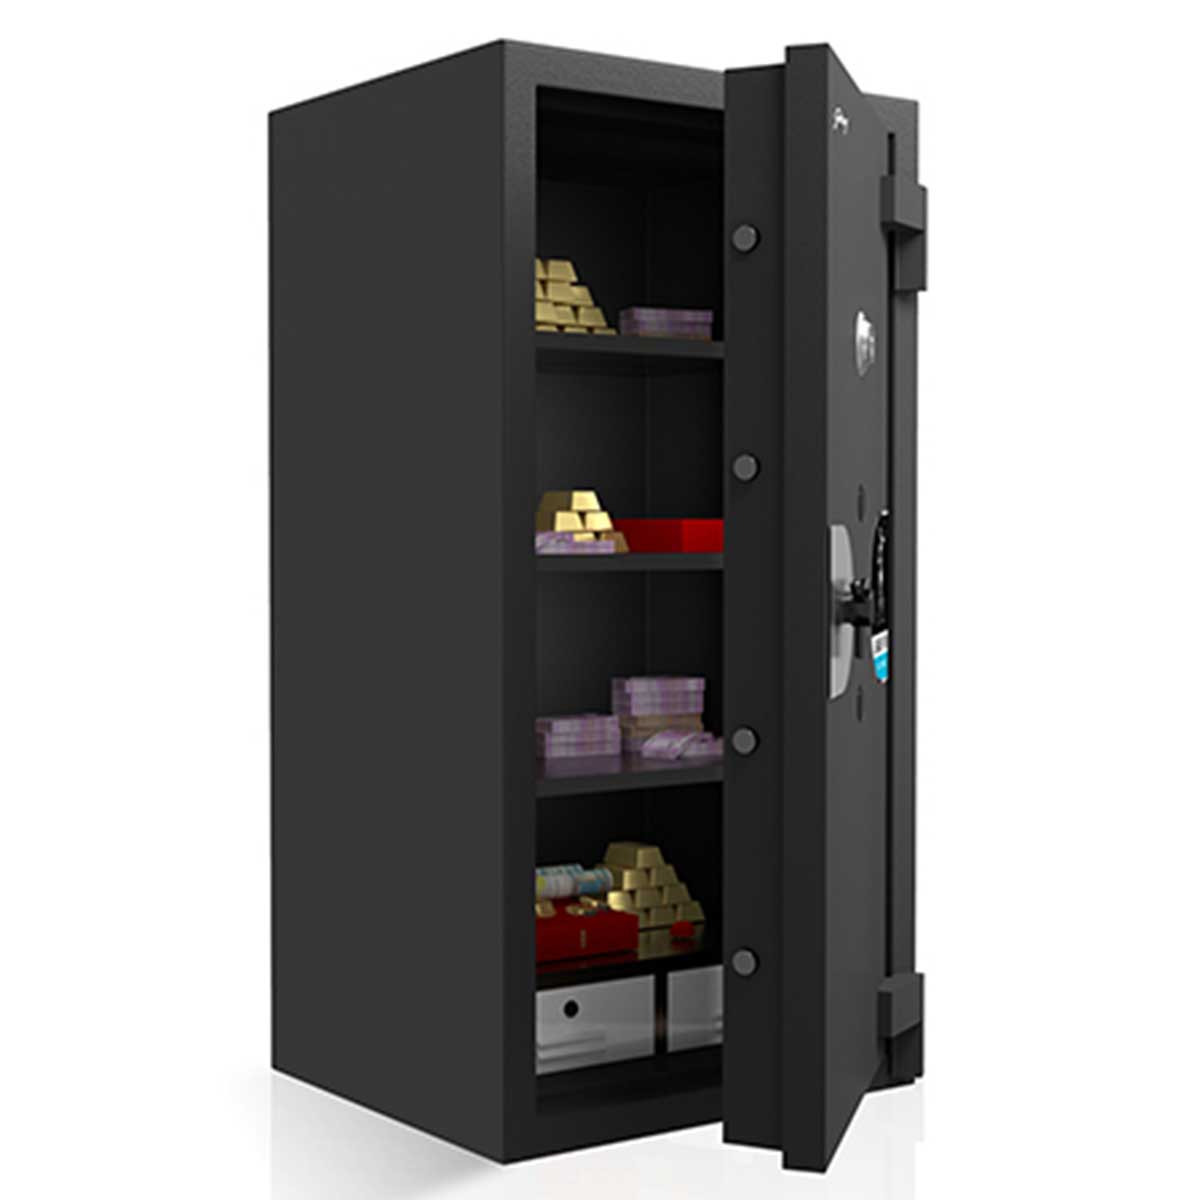 Jewellry locker Manufacturers, Suppliers in Faridabad Sector 21c